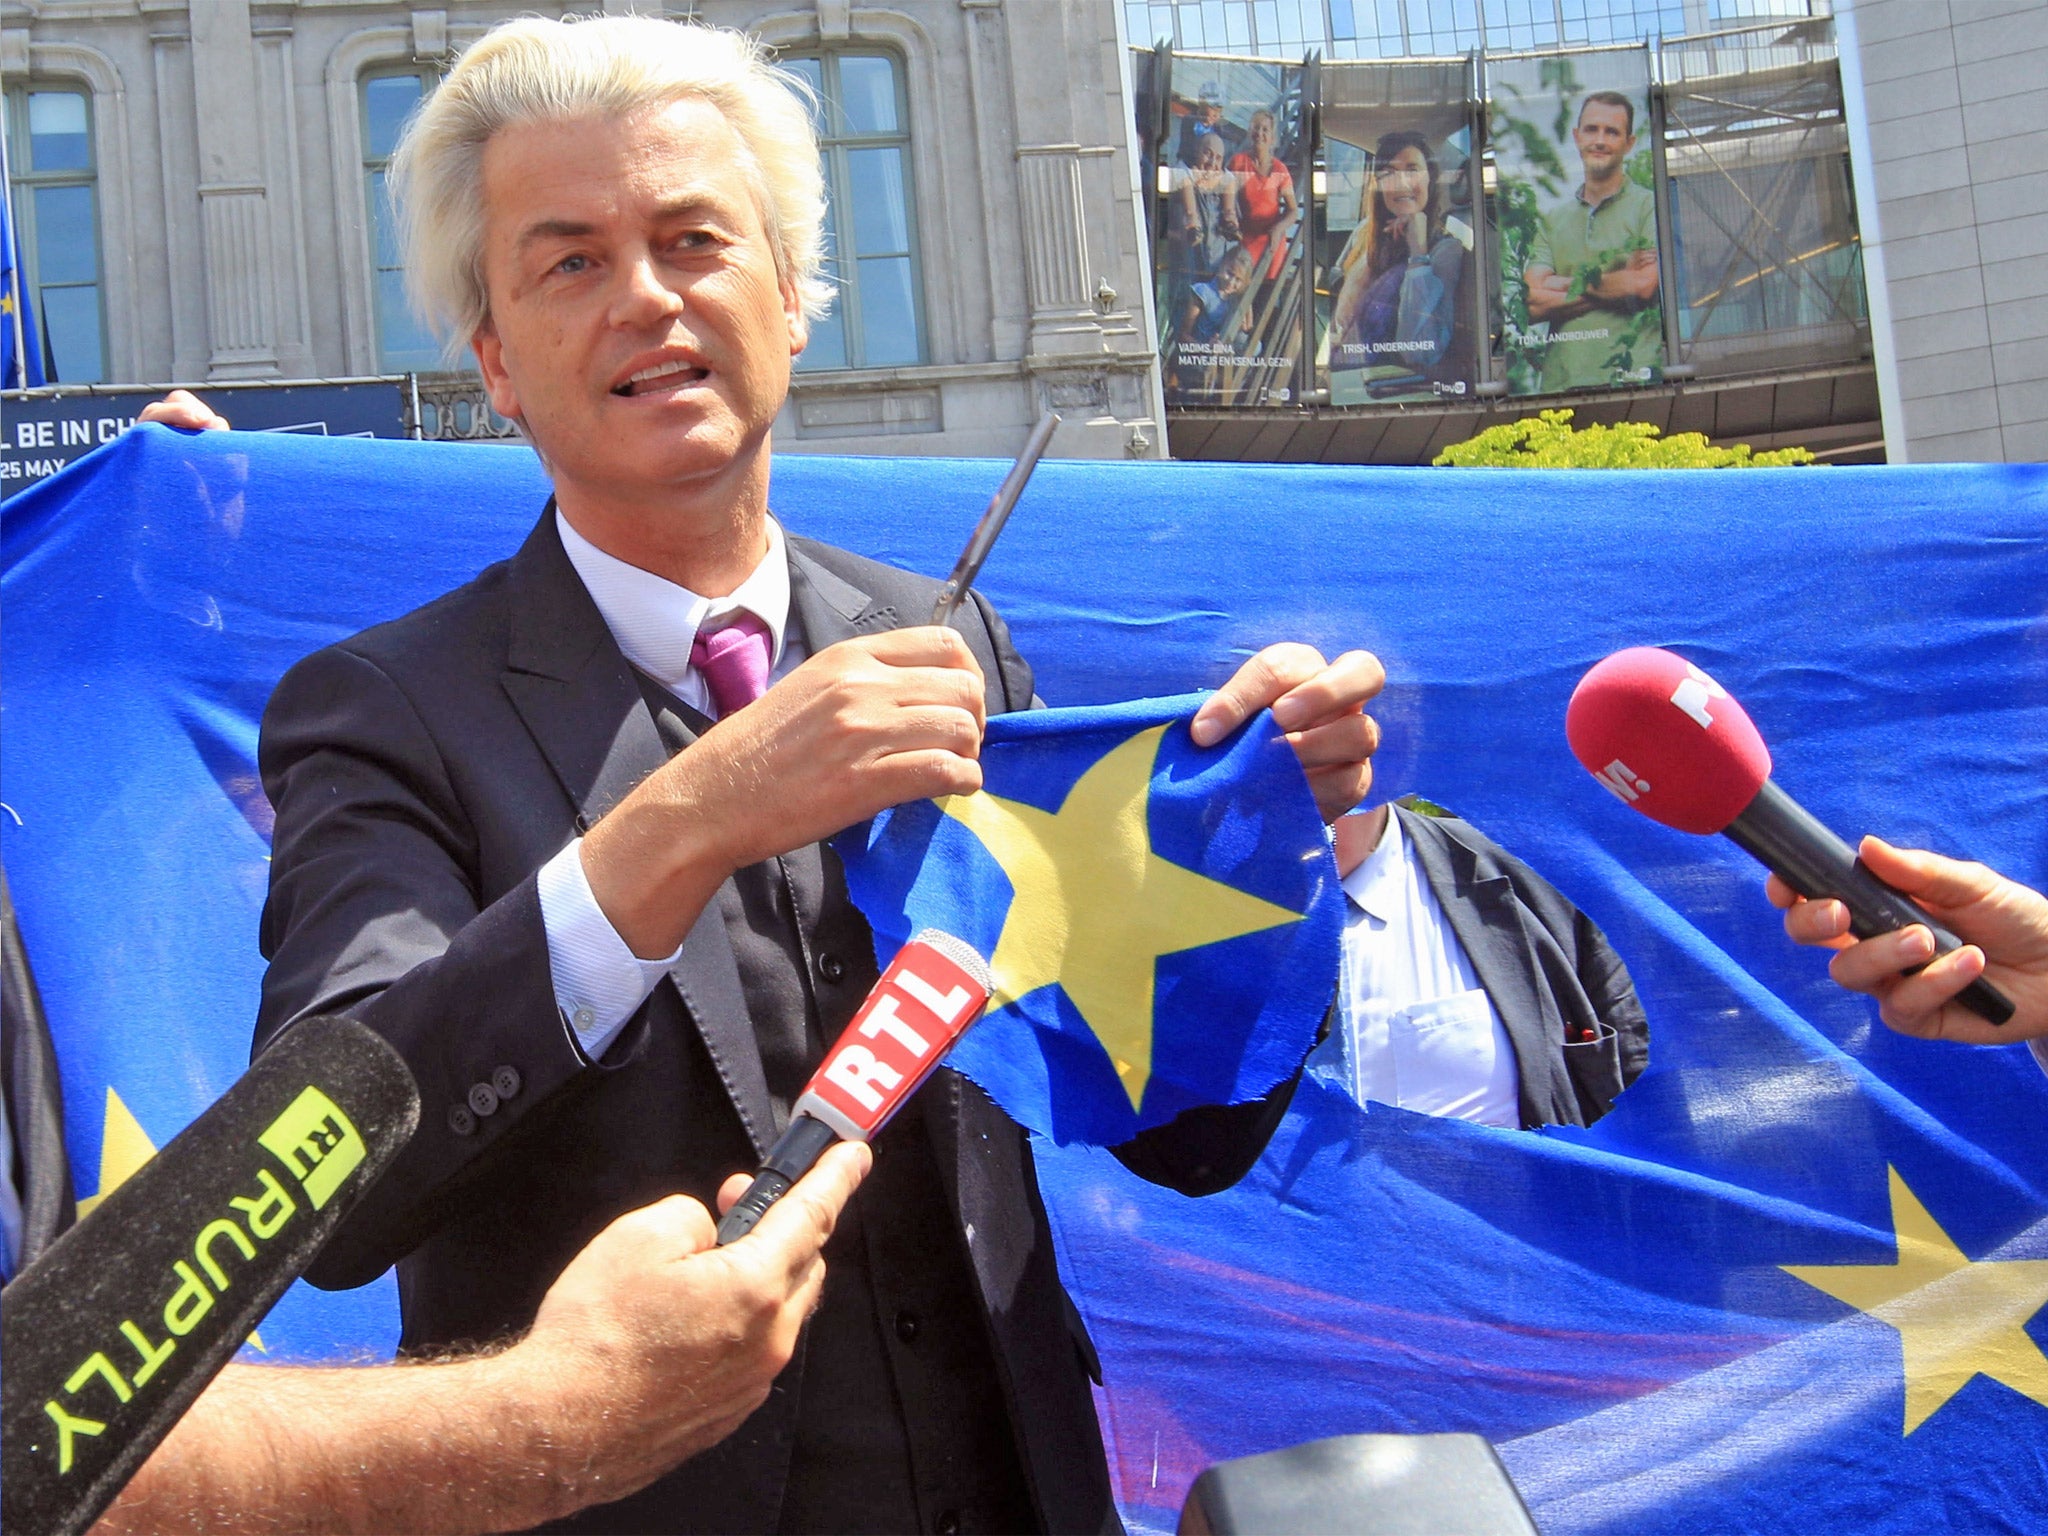 Dutch PPV party leader Geert Wilders displays a yellow star he cut out of the EU flag in front of the European Parliament in Brussels